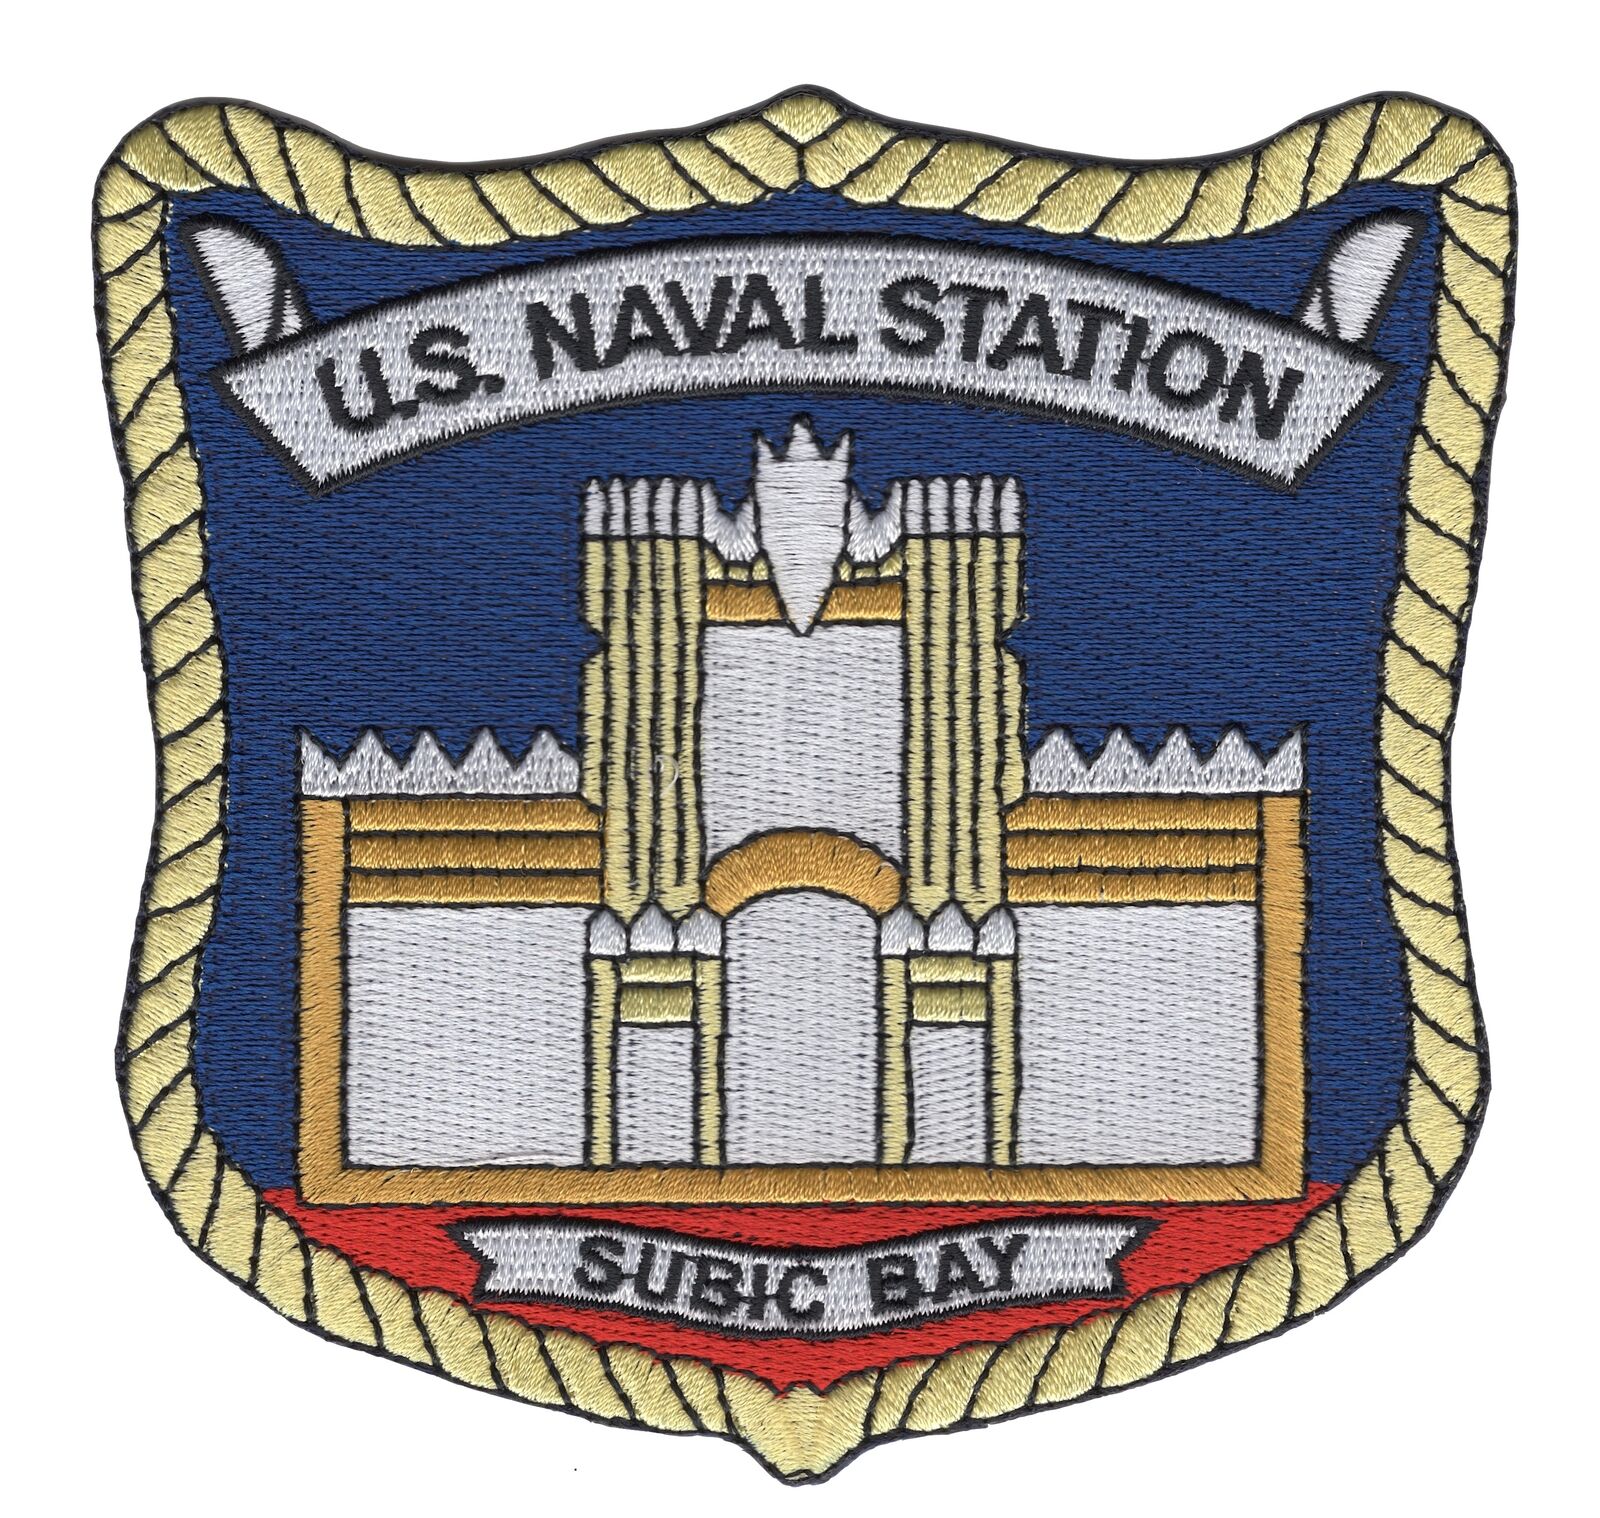 Naval Station Subic Bay Philippines Original Version Patch